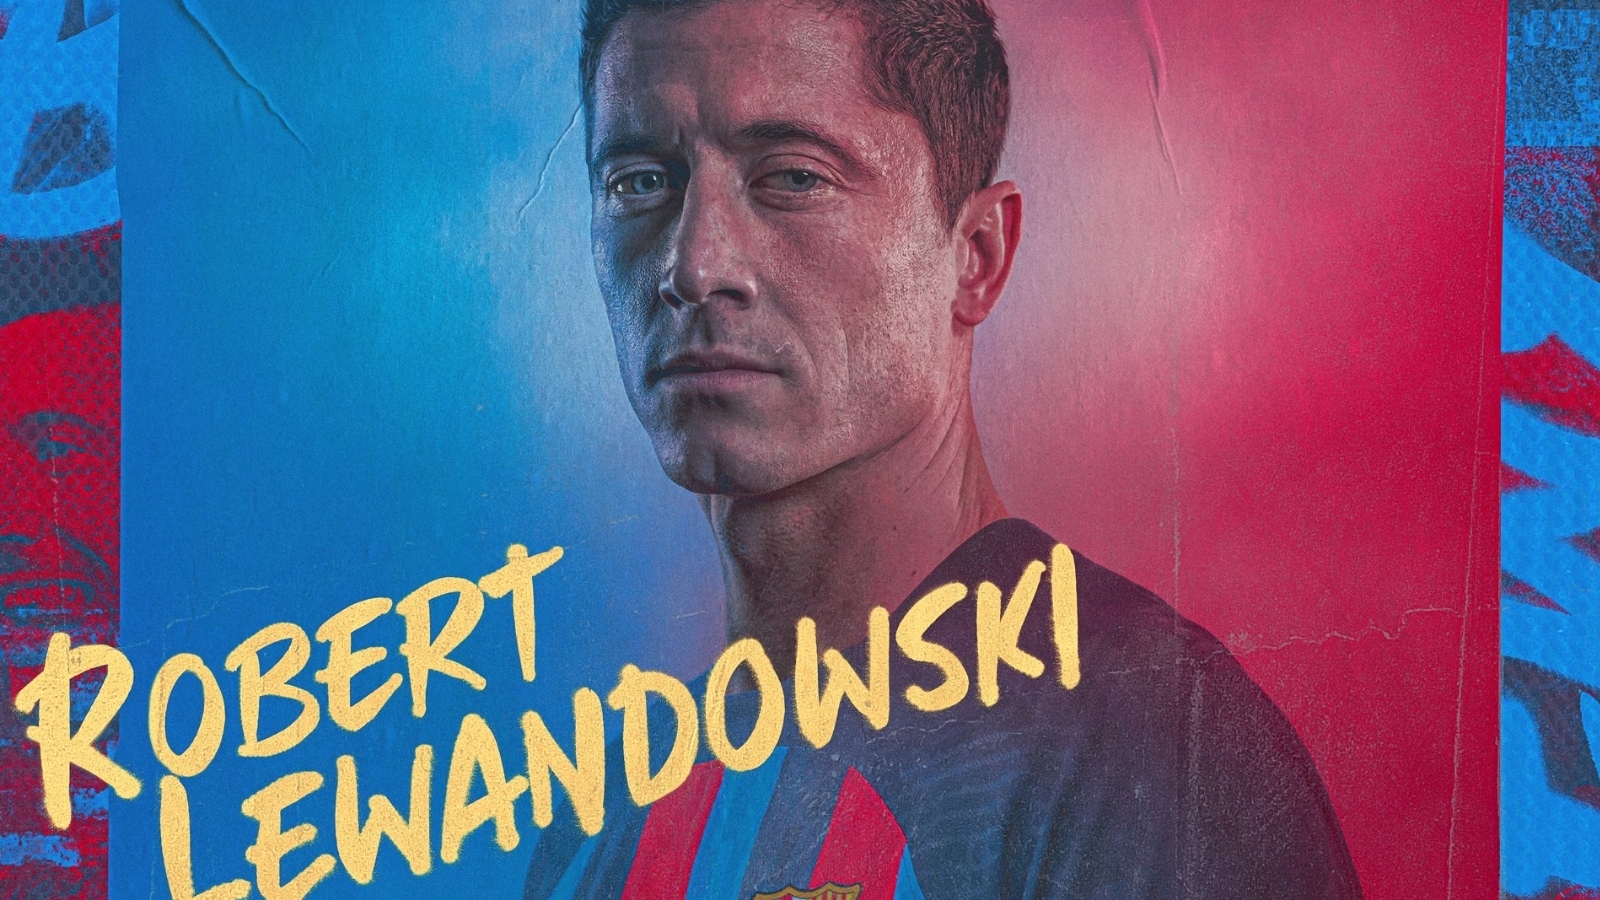 Barcelona sell out of Lewandowski shirts club shop runs out of the letter W to put on jerseys